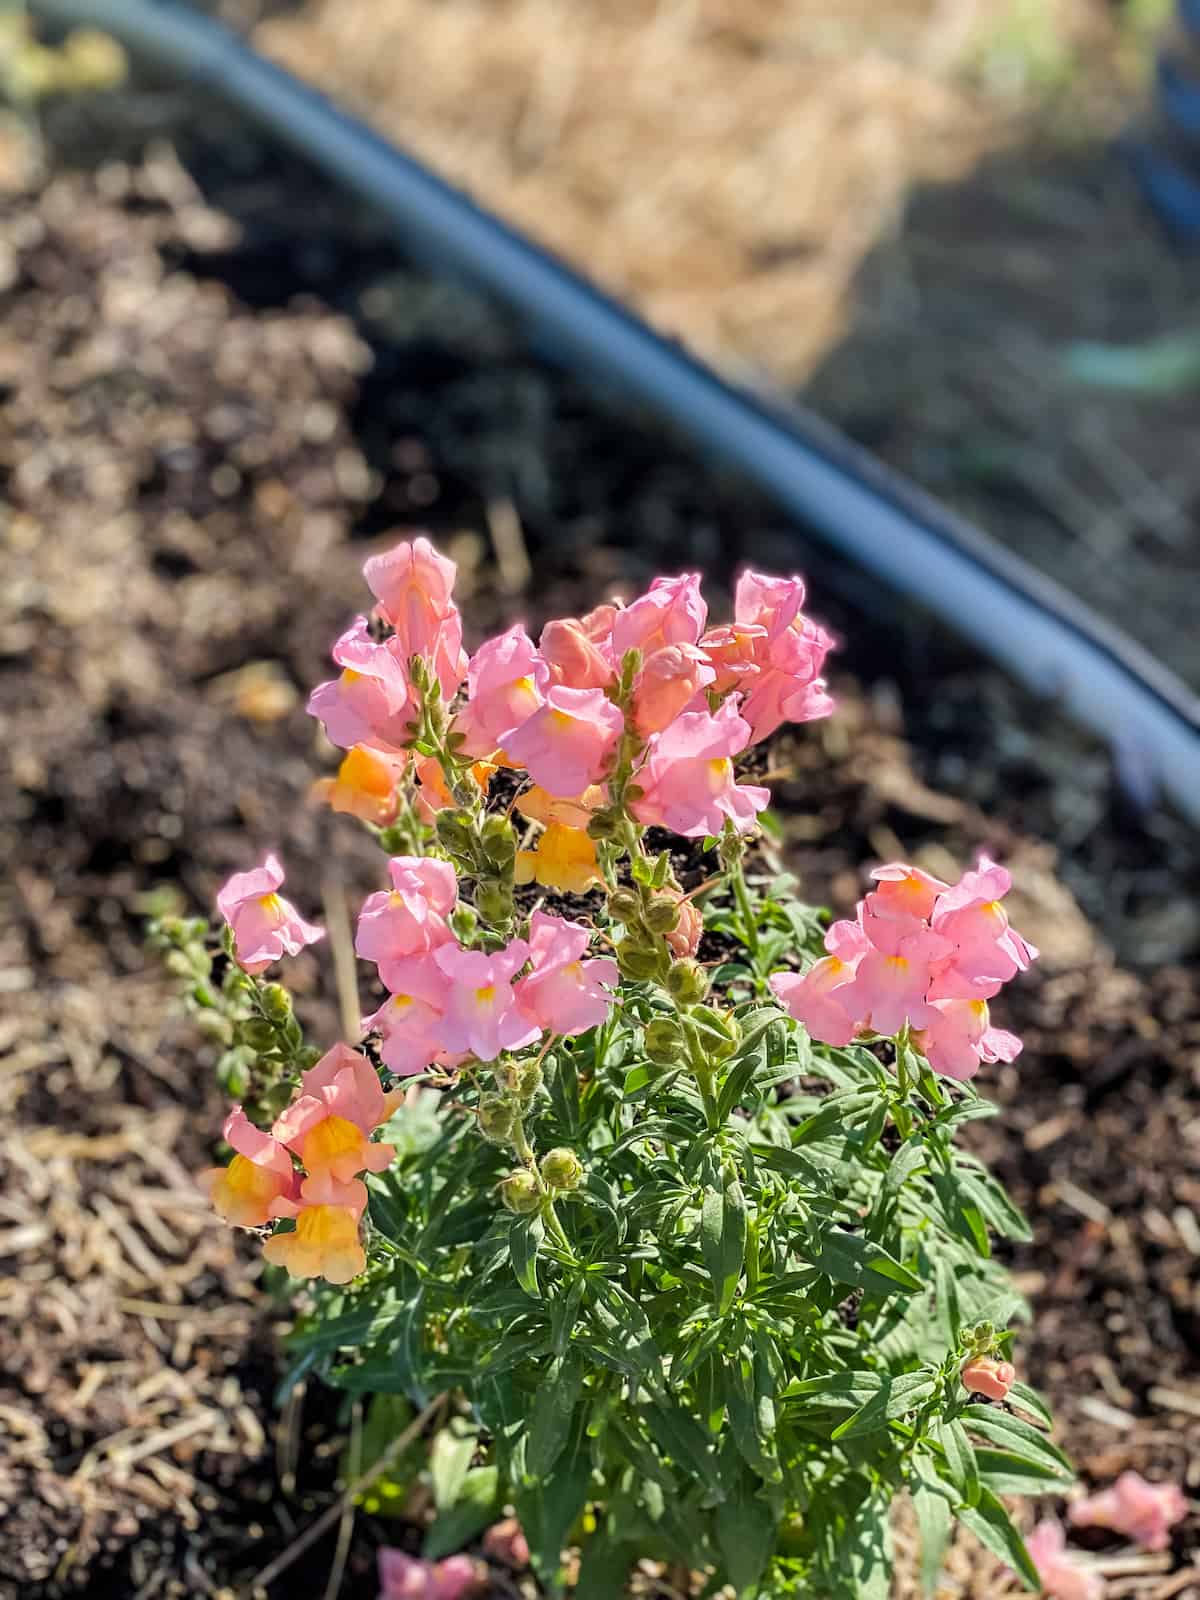 light pink snapdragon flowers in a raised bed.